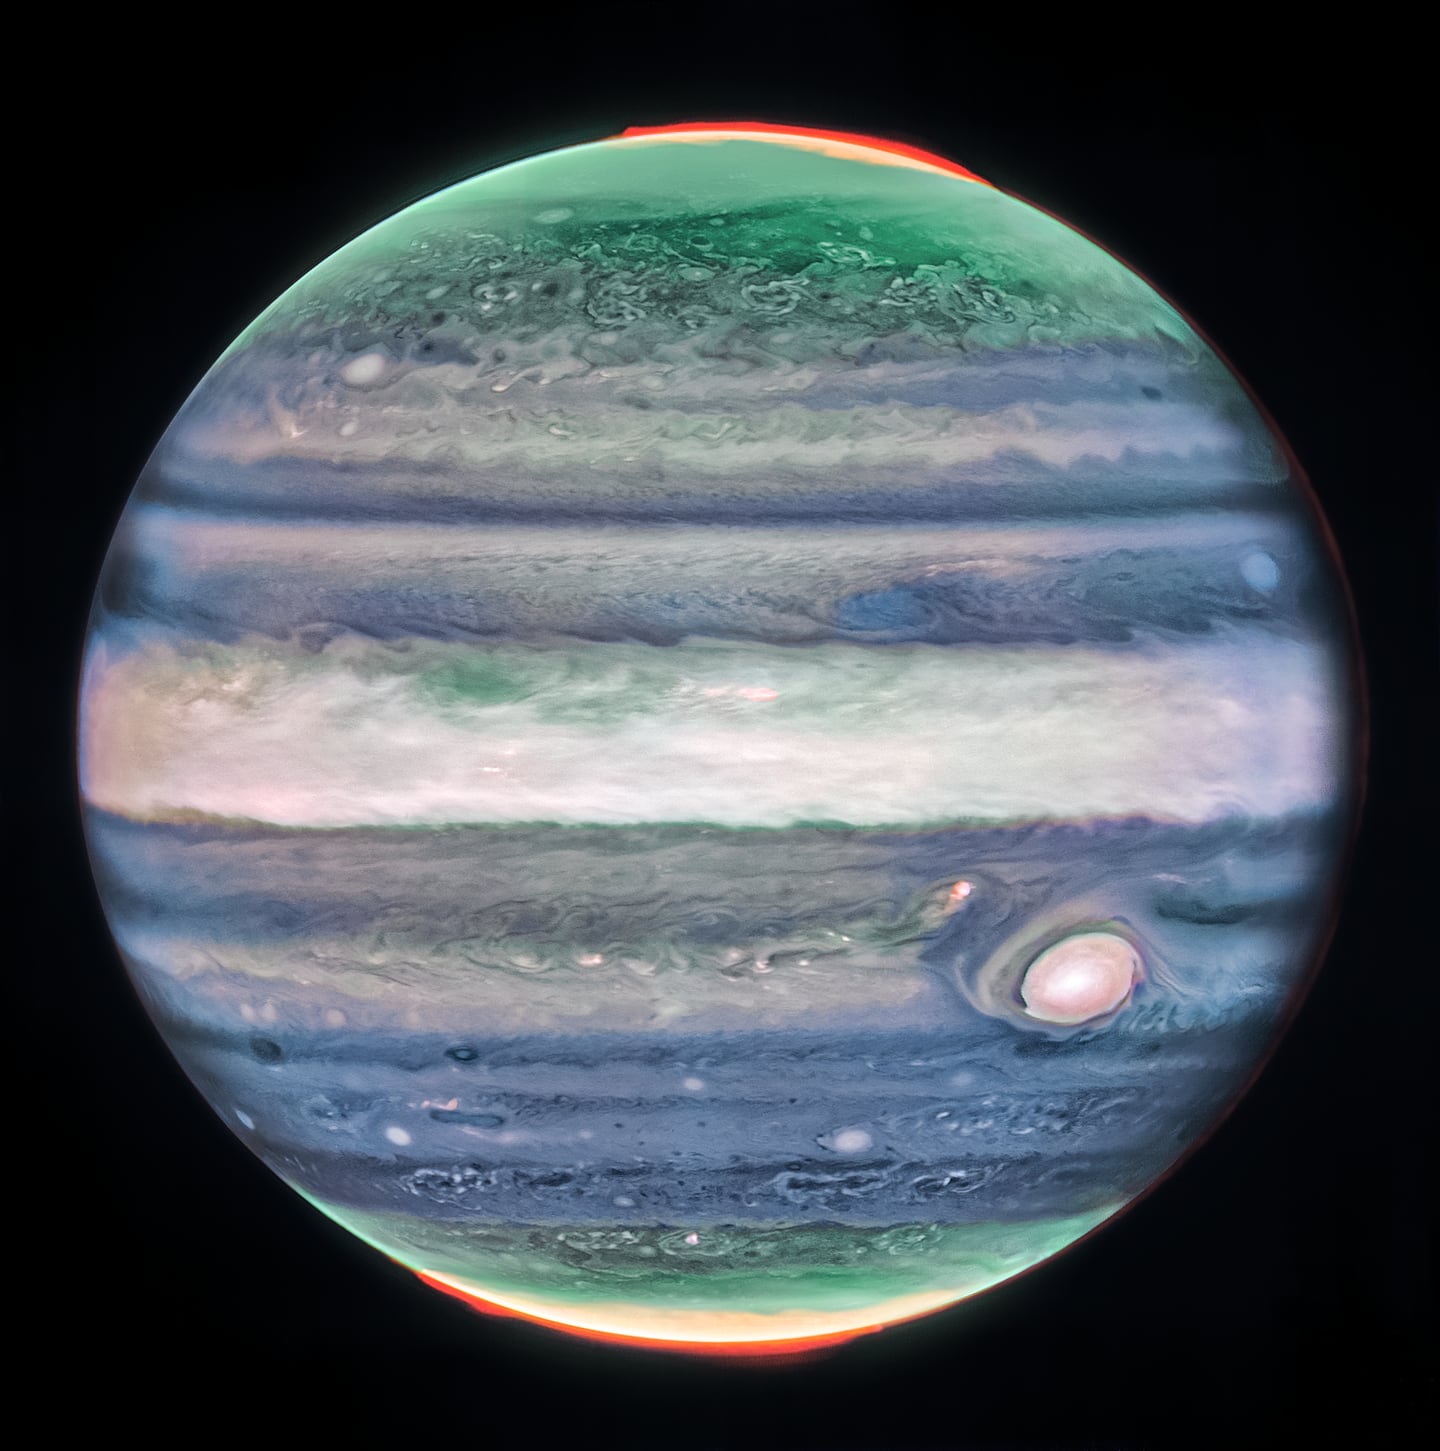 This image of Jupiter from NASA’s James Webb Space Telescope’s NIRCam (Near-Infrared Camera) shows stunning details of the majestic planet in infrared light. In this image, brightness indicates high altitude.